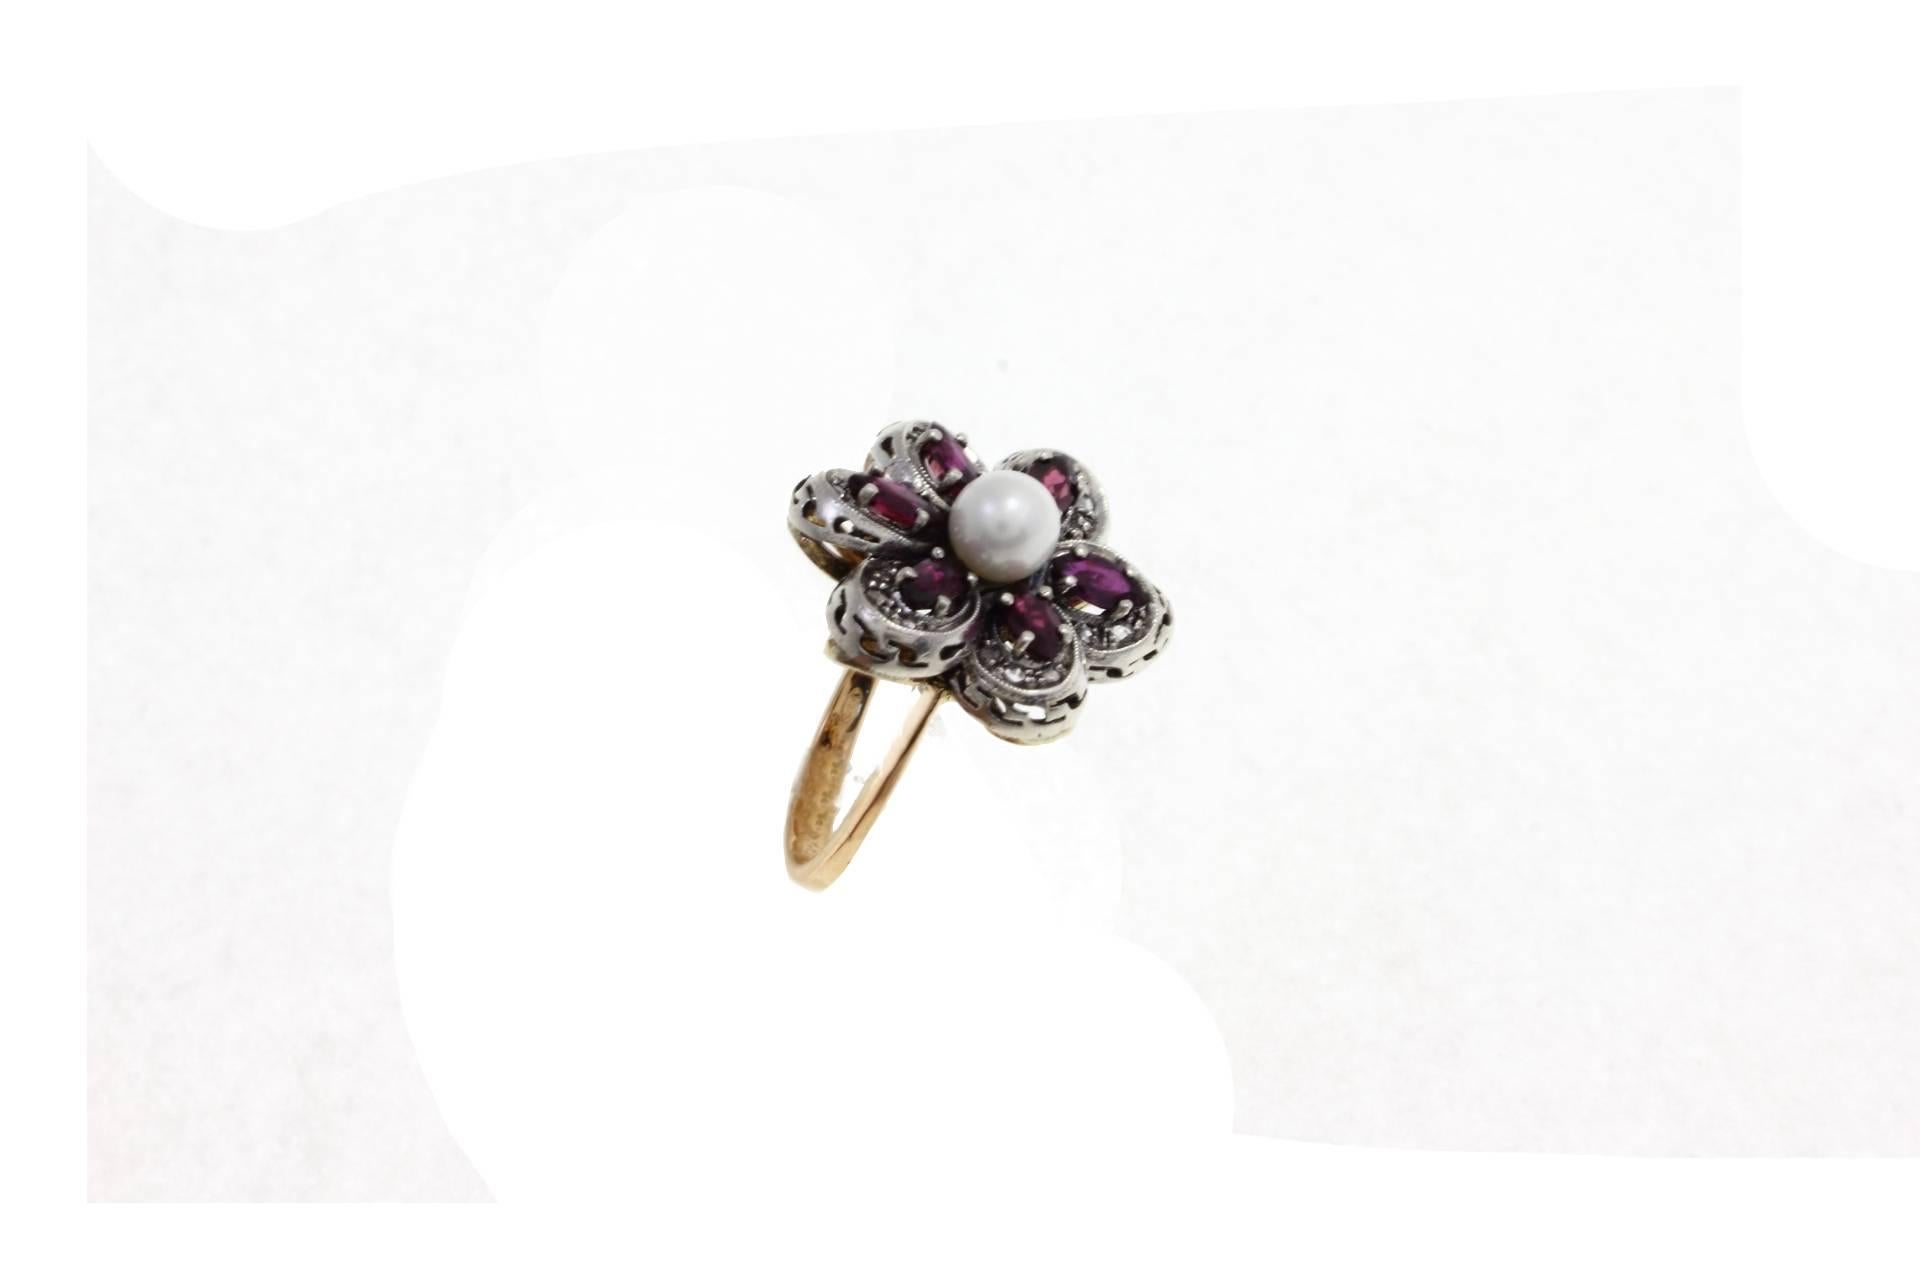 Flower shaped ring in 14kt yellow gold and silver composed of a central pearl surrounded by rubies petals and diamonds.

diamonds 0.13kt
rubies 2.31kt
pearl 6 mm/0.23 inch
tot weight 9.5
r.f.  hea